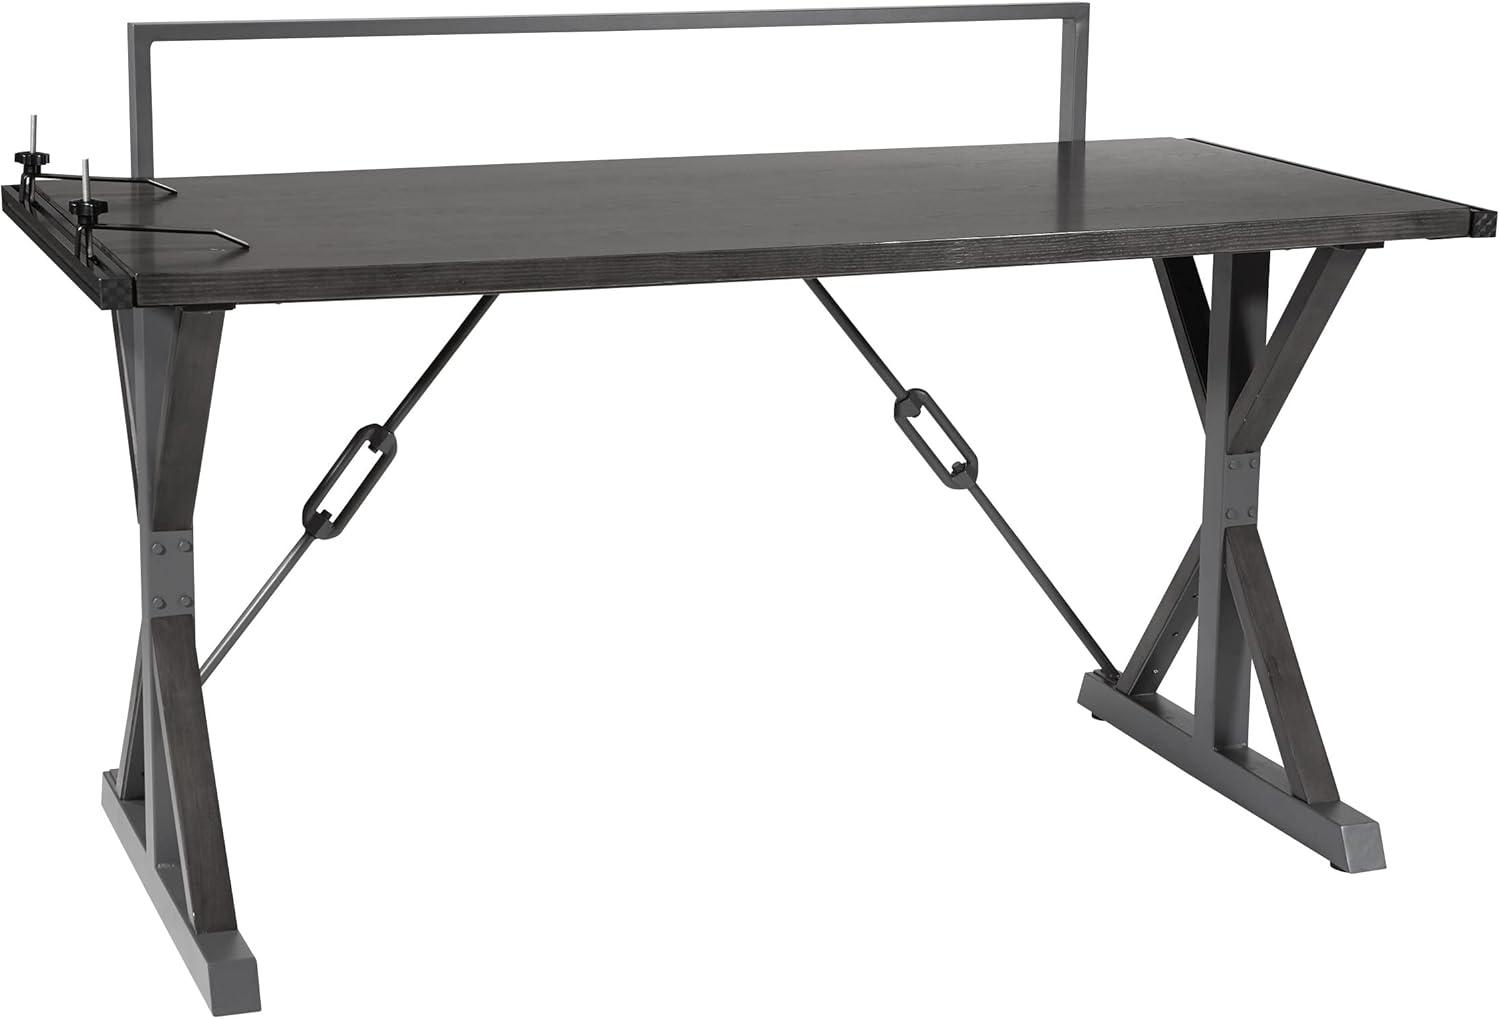 Essential Maker's Gray Wood Desk with Power Outlet and Cable Management